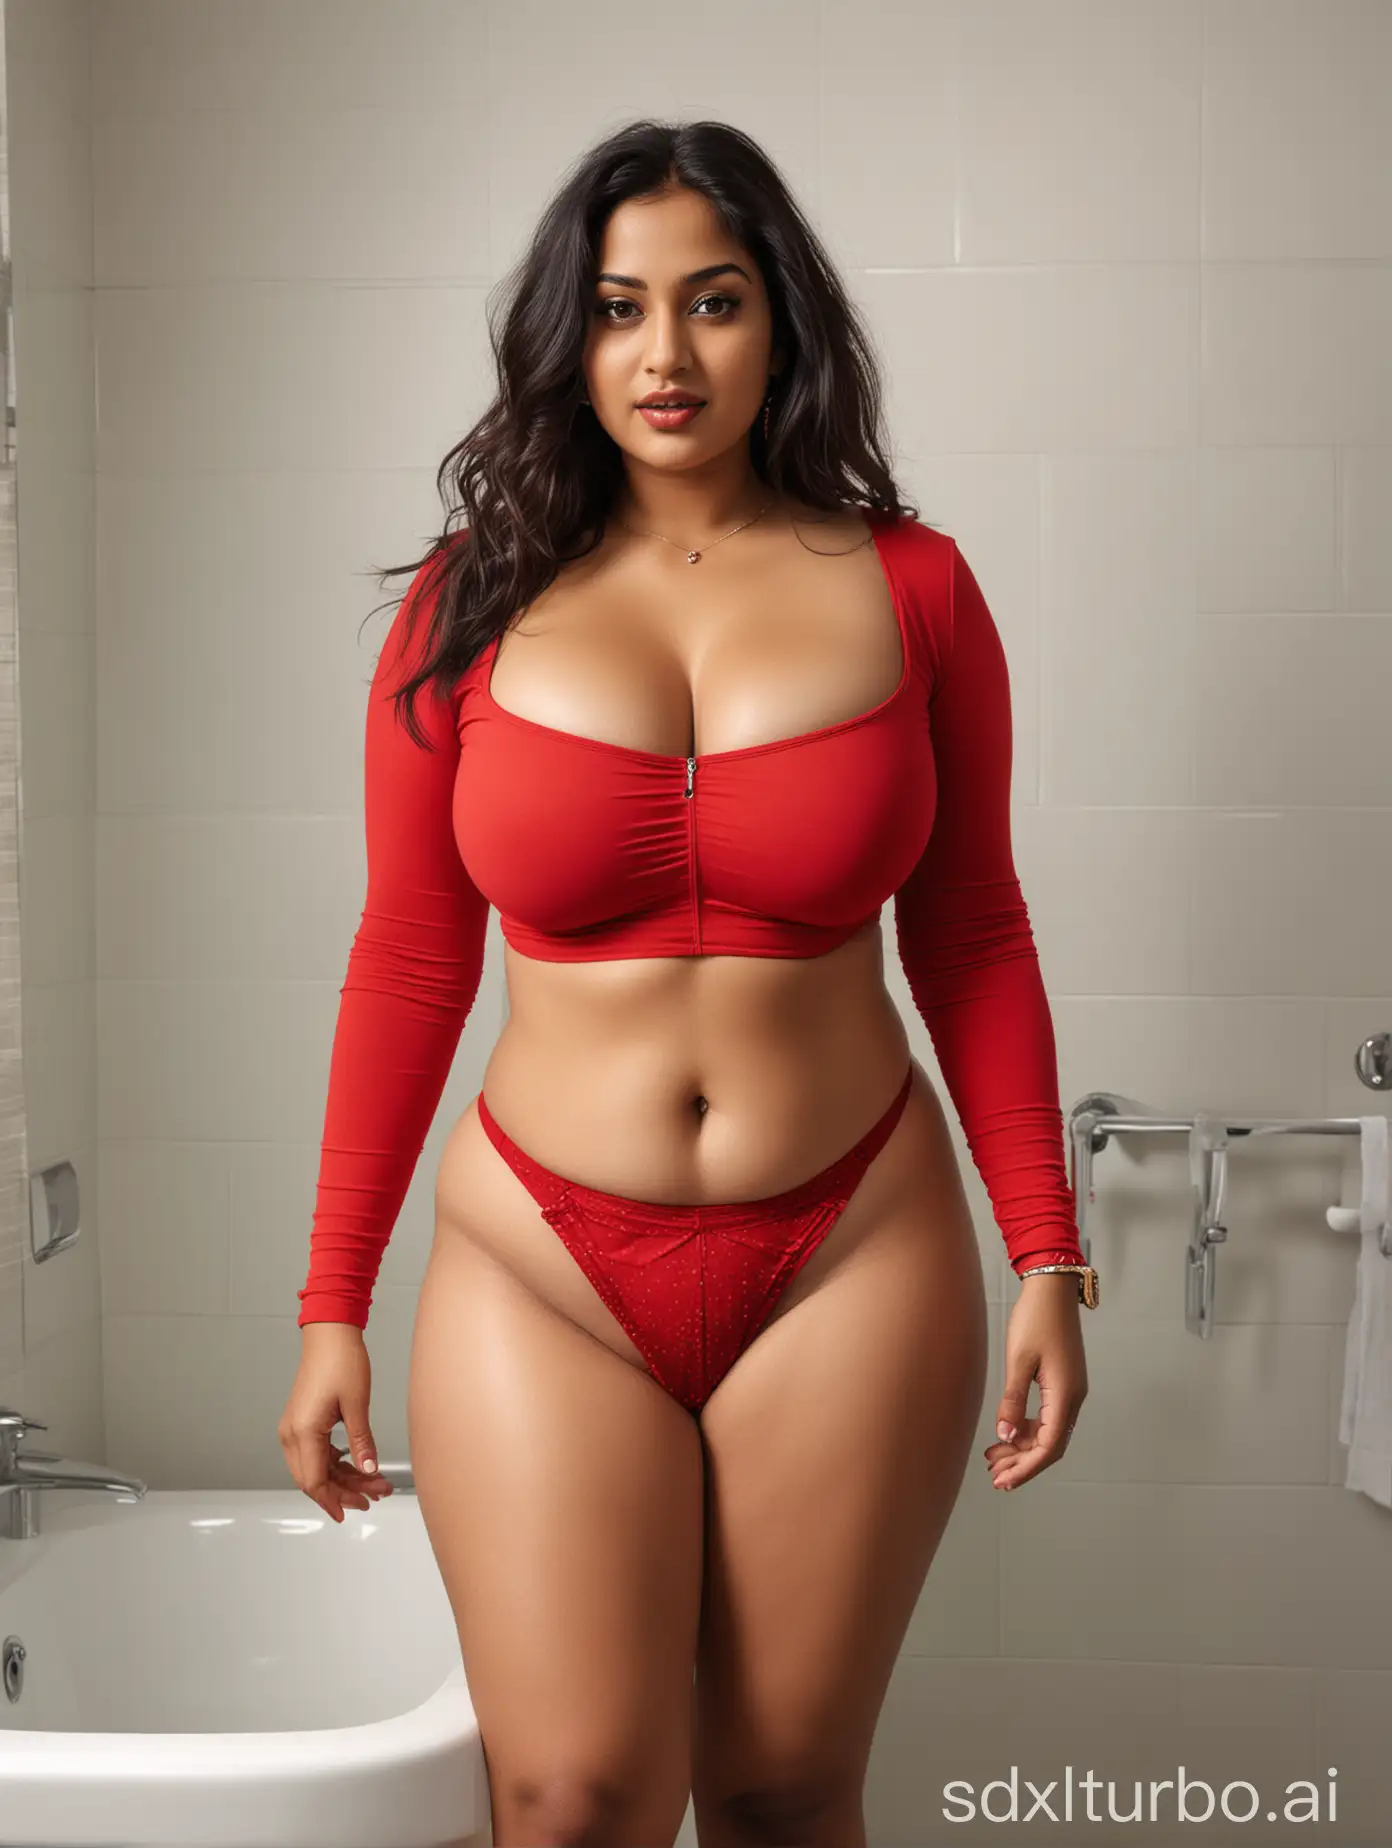 CURVY Indian woman with large breasts, with plump feminine figure, wearing a tight long-sleeved red square neck cropped top with deep cleavage and red thong, with a busty body, is standing in the bathroom.